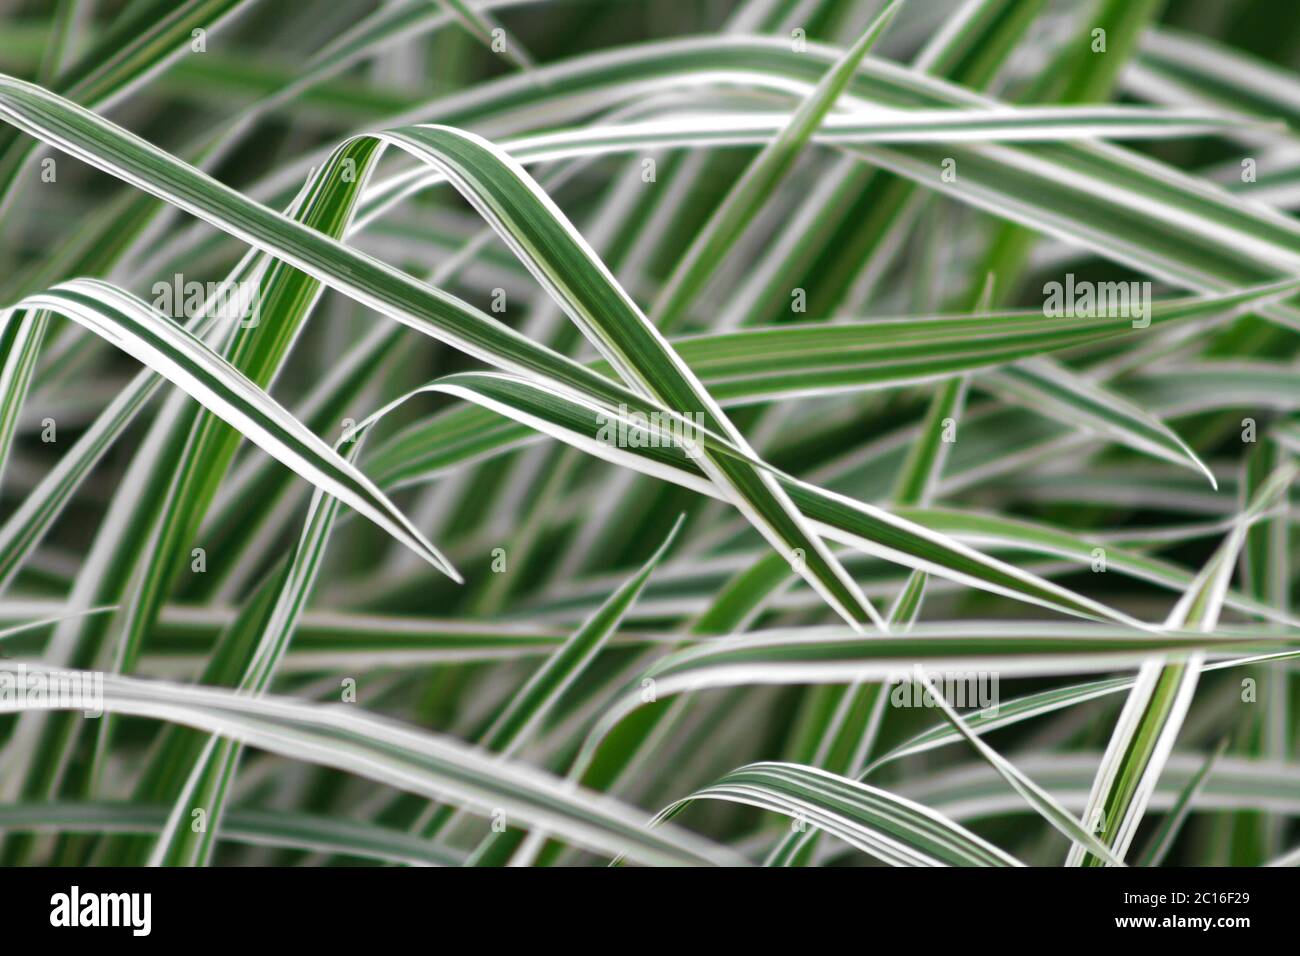 striped white and green color grass, defocused background of Phalaris leaves Stock Photo